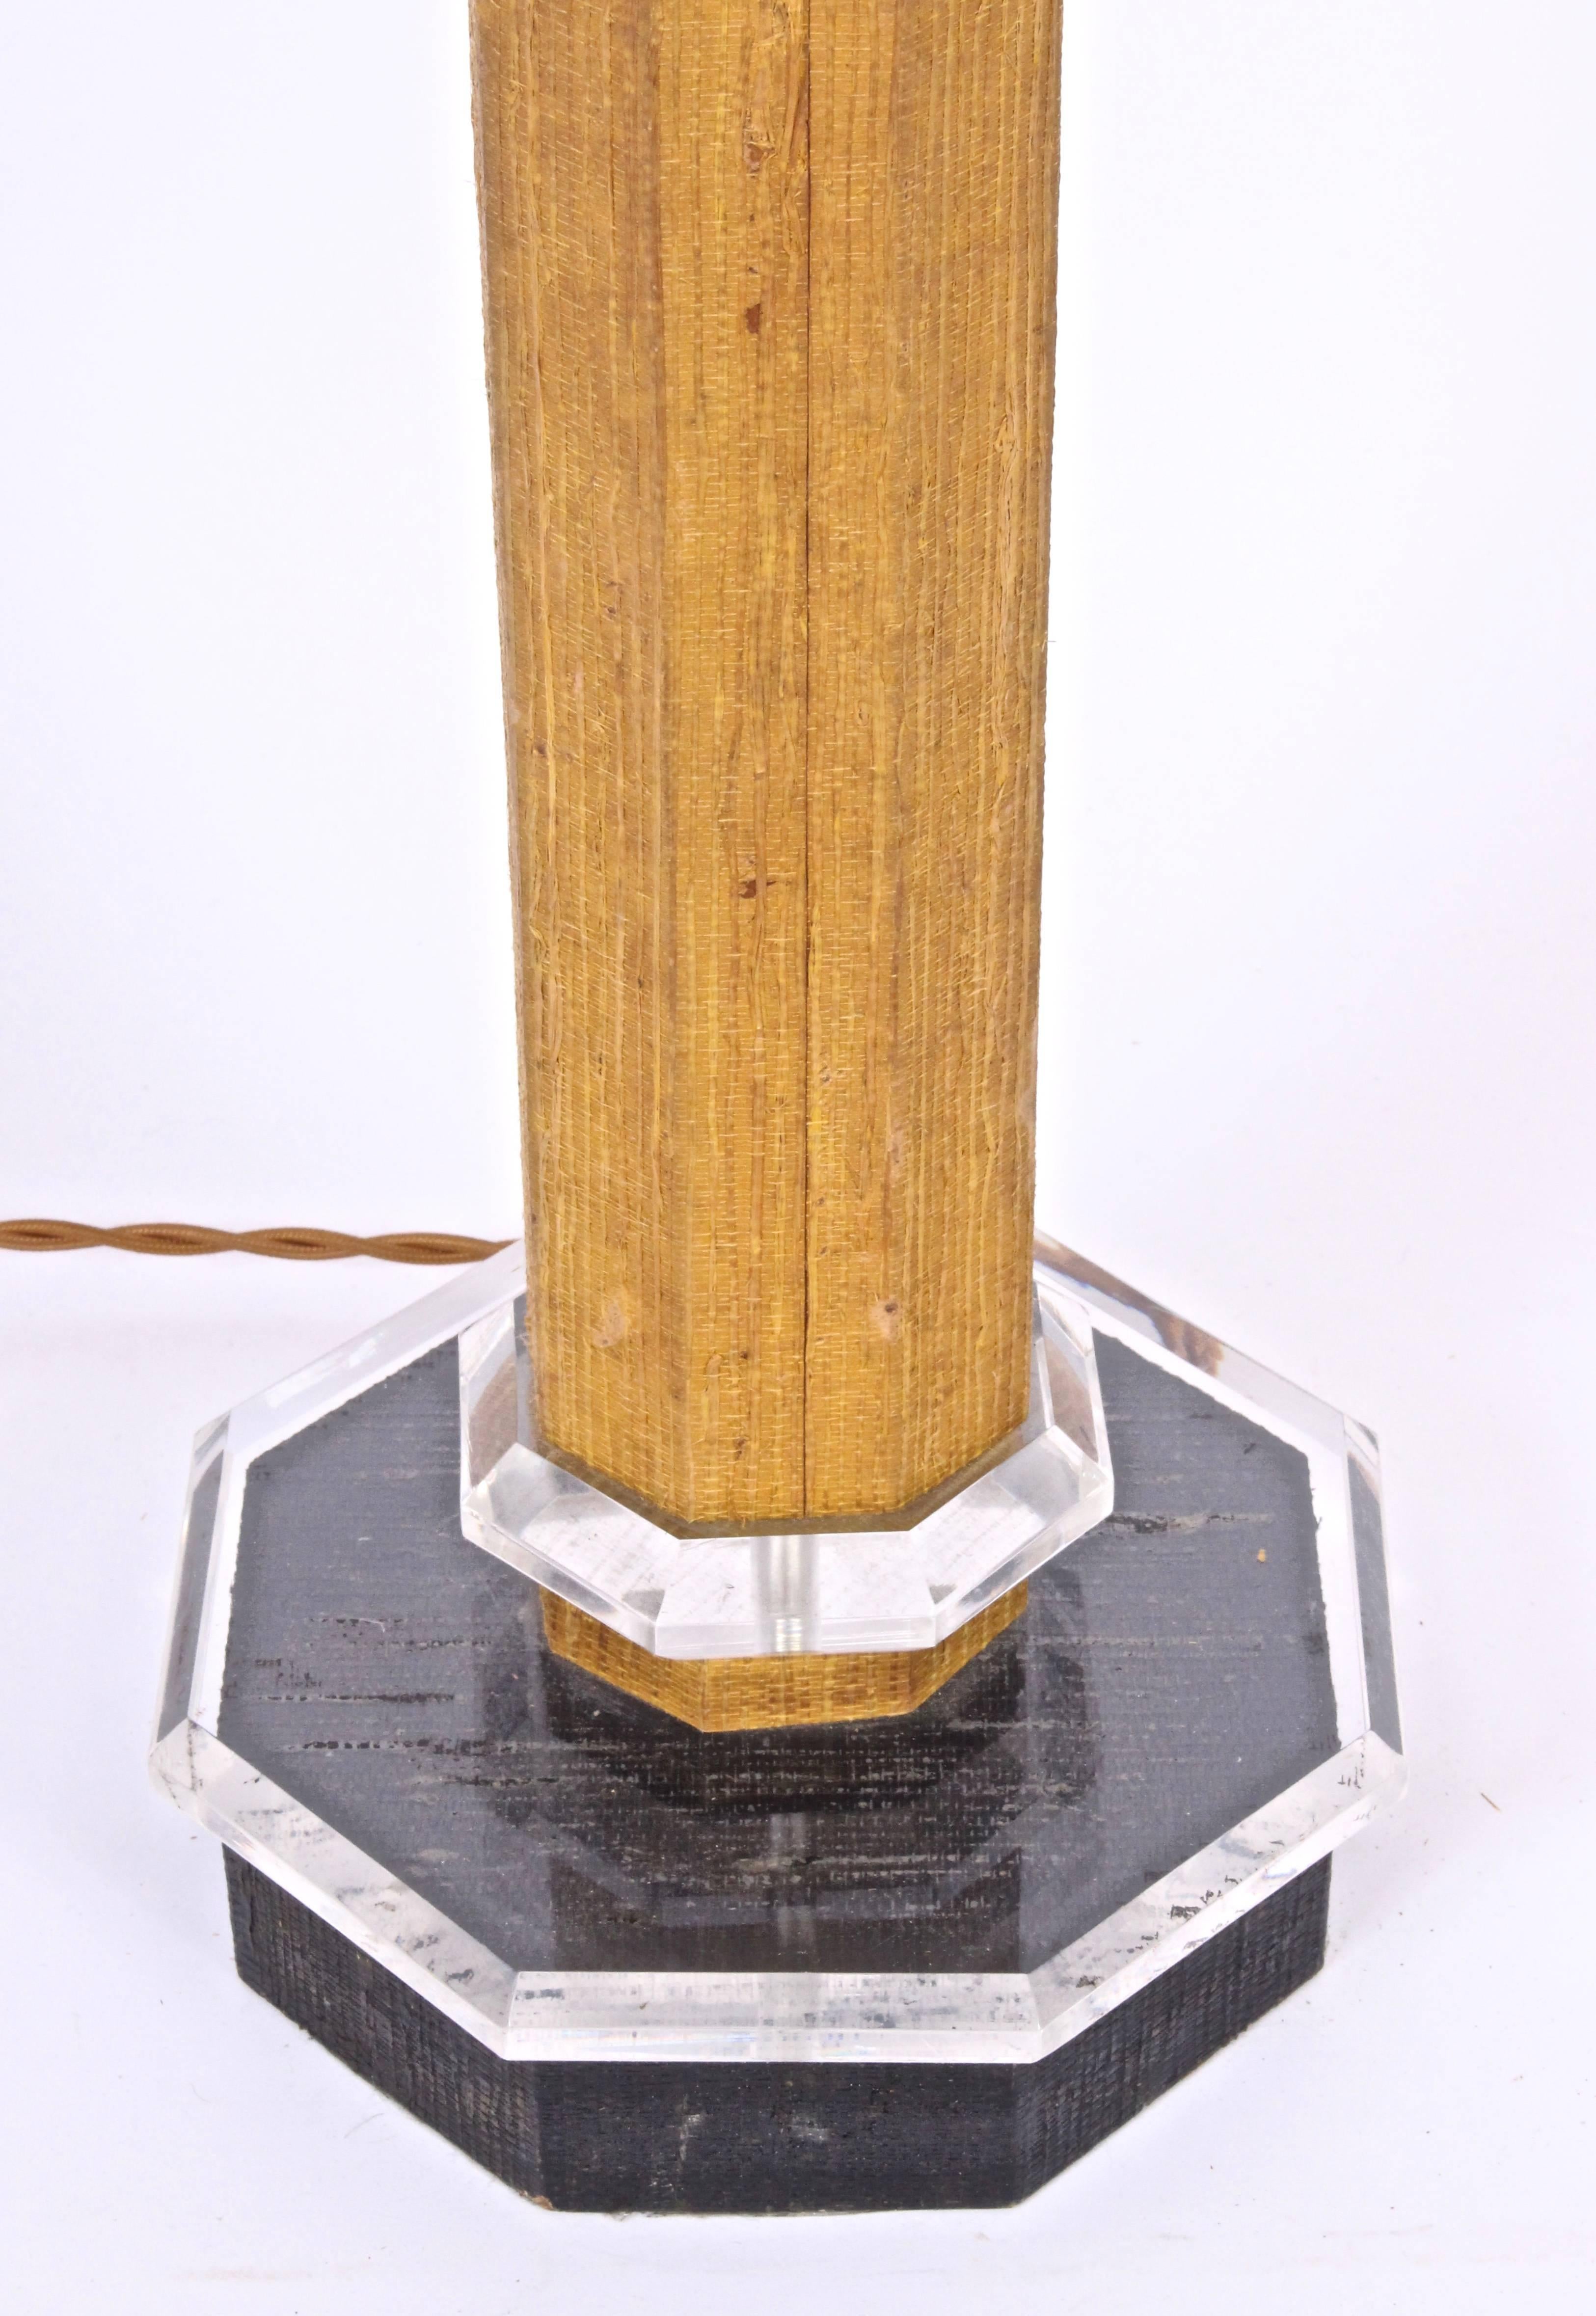 Plated Tall Karl Springer Style Grasscloth, Lucite & Black Enamel Table Lamp, 1970s For Sale